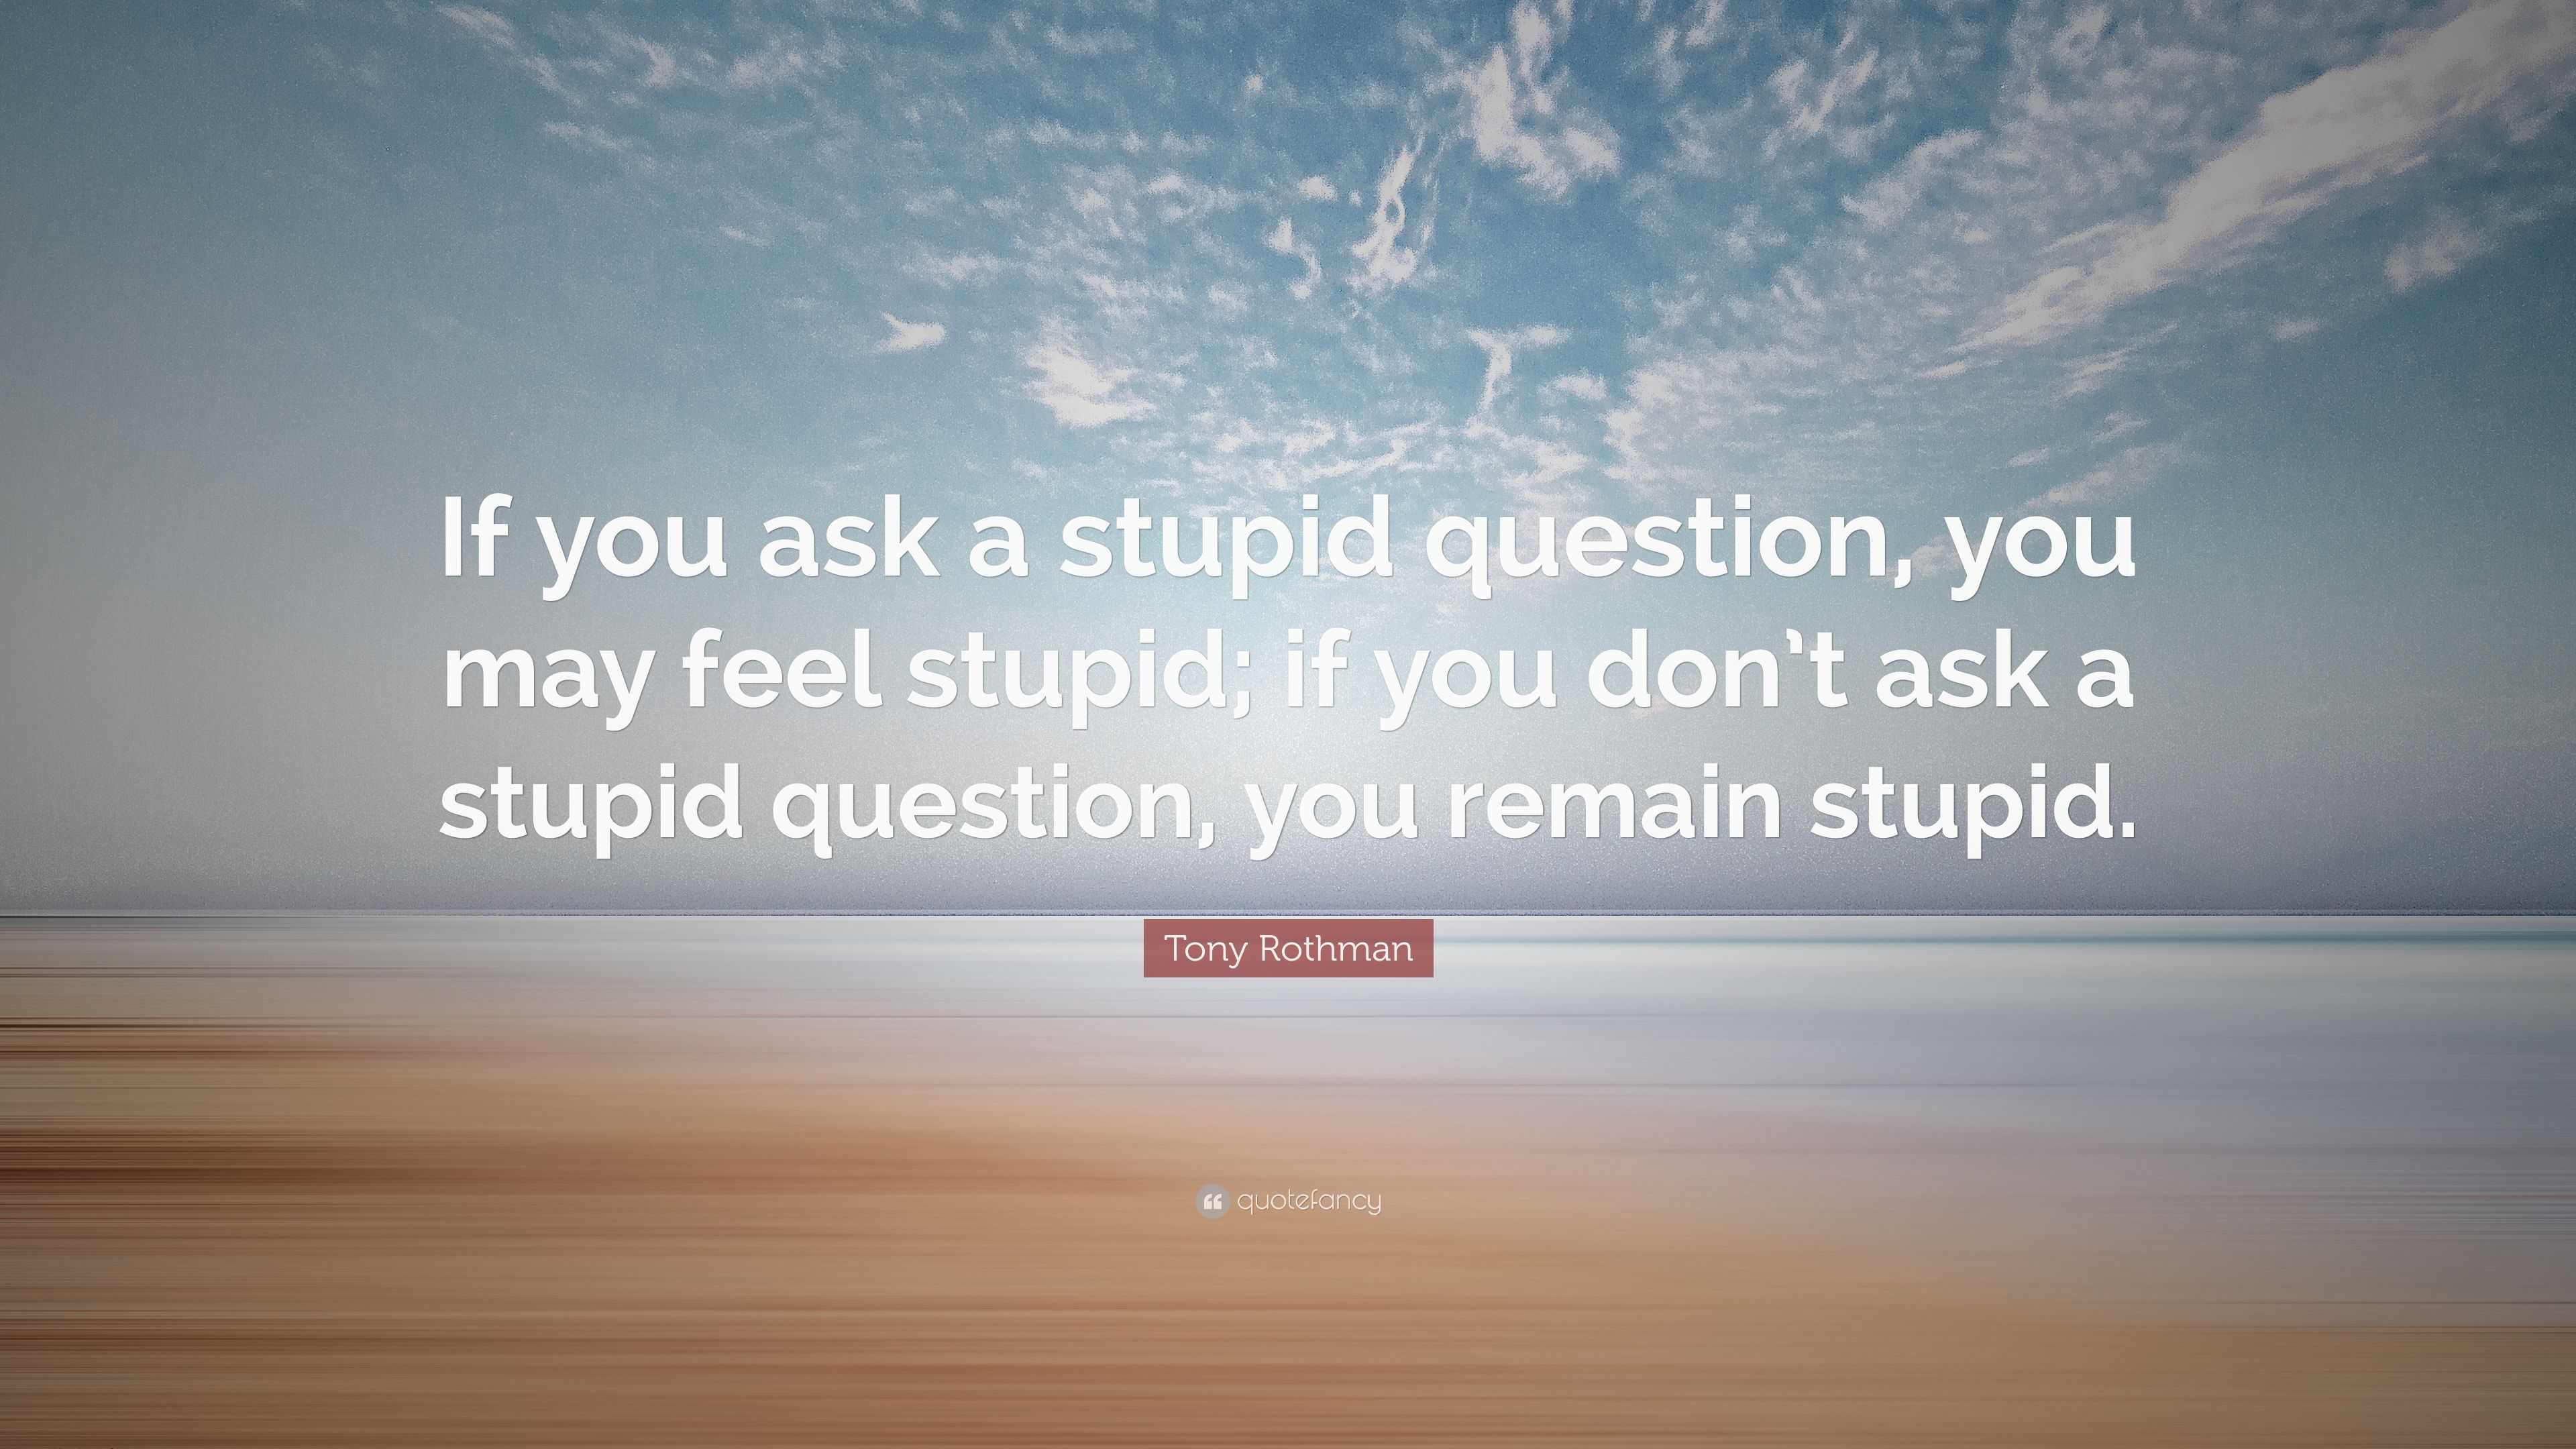 Tony Rothman Quote: "If you ask a stupid question, you may ...